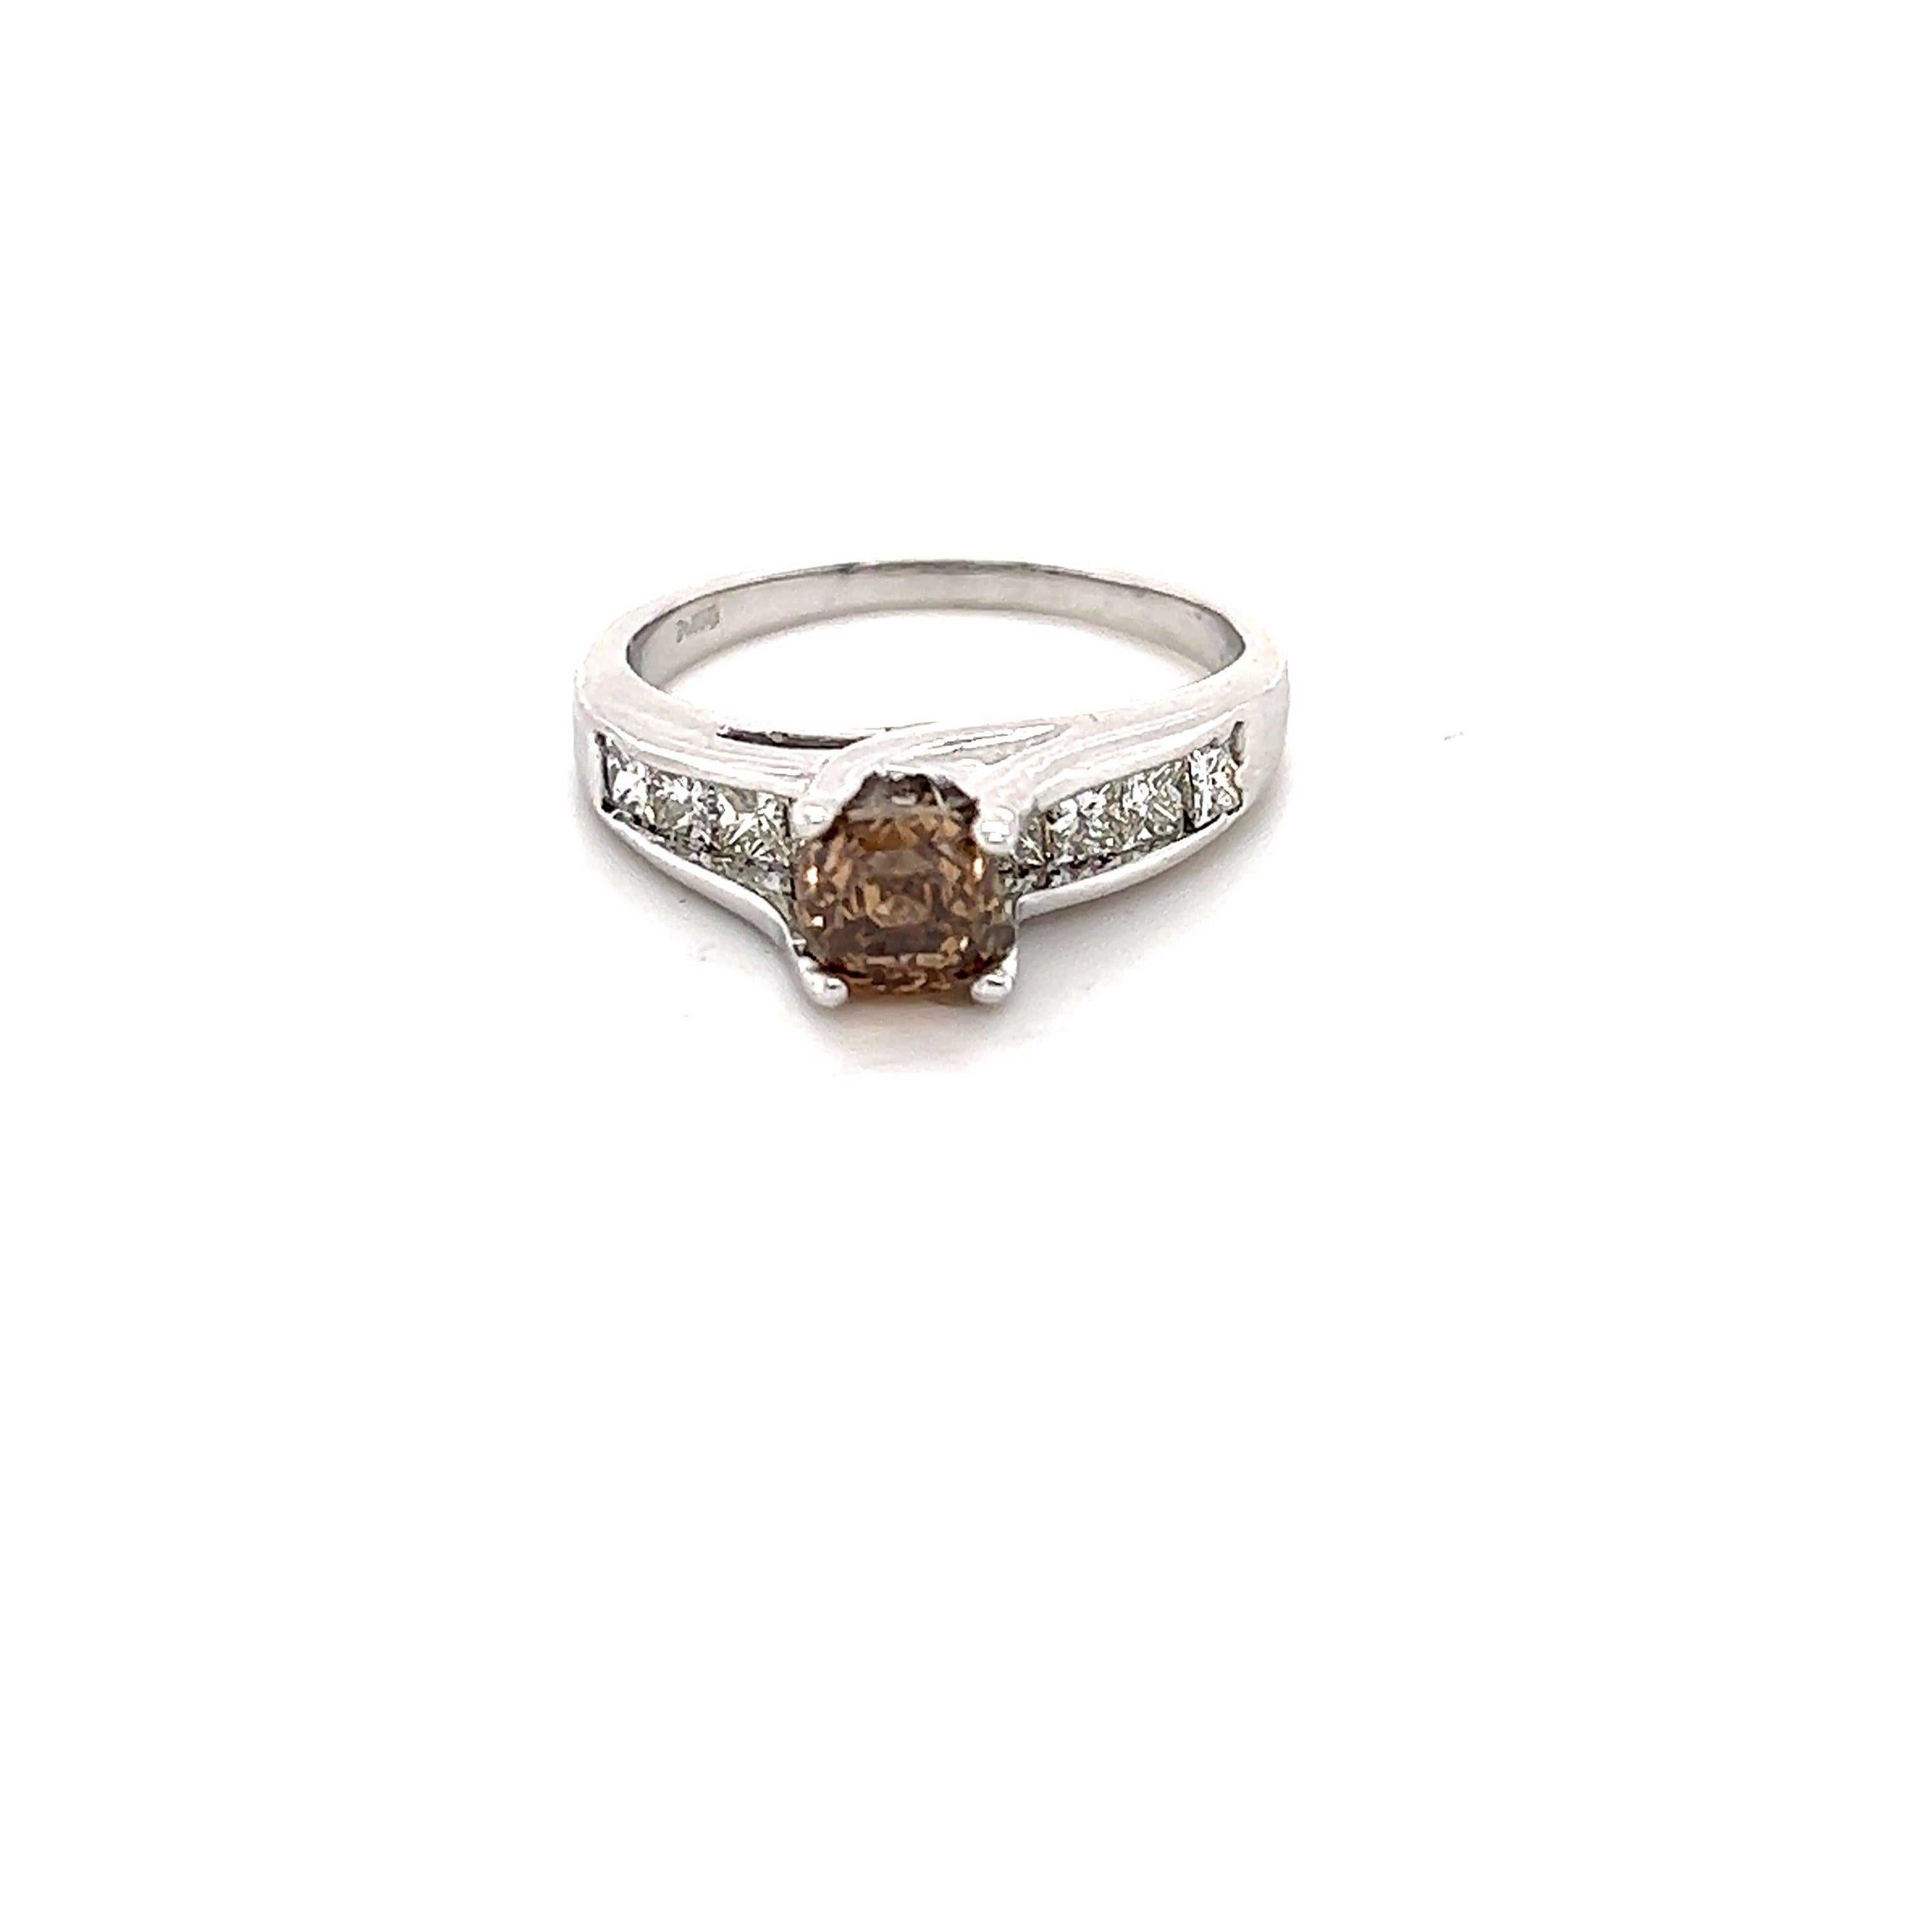 This ring has a Asscher Cut Brown Diamond that weighs 1.10 Carats with a VS clarity. It has 9 Princess Cut Diamonds that weigh 0.85 carats. The Clarity and Color of the Diamonds are VS-F. The total carat weight of the ring is 1.95 Carats. 

Crafted